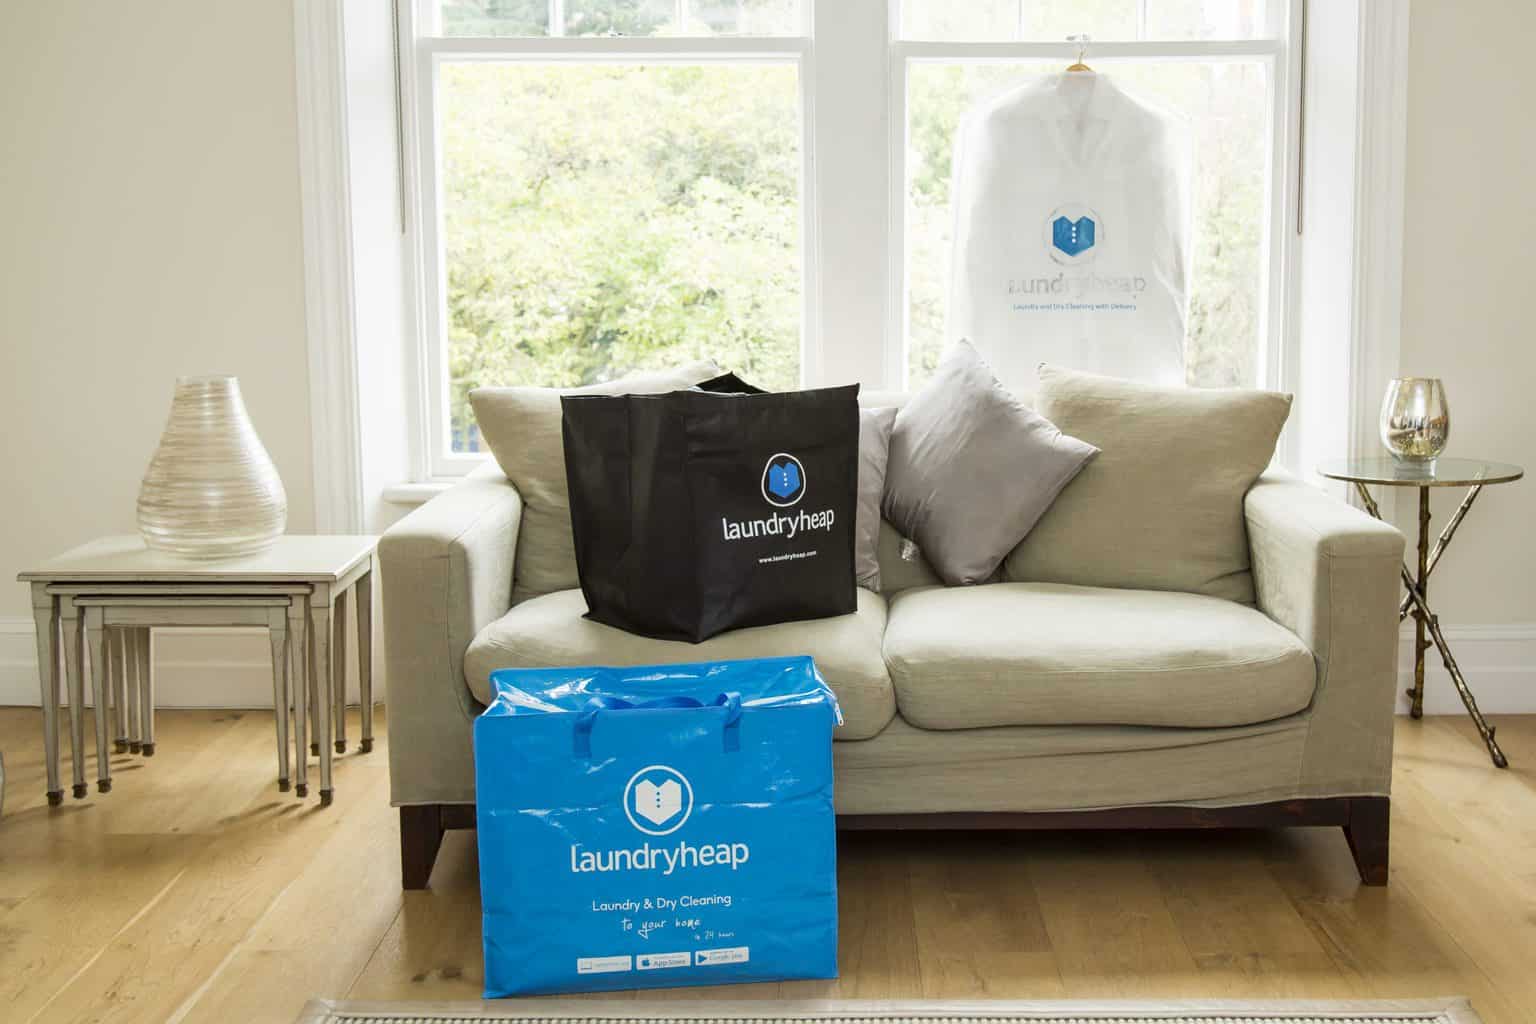 Laundryheap Review: Laundry Services for Savvy Travelers Visiting Dubai